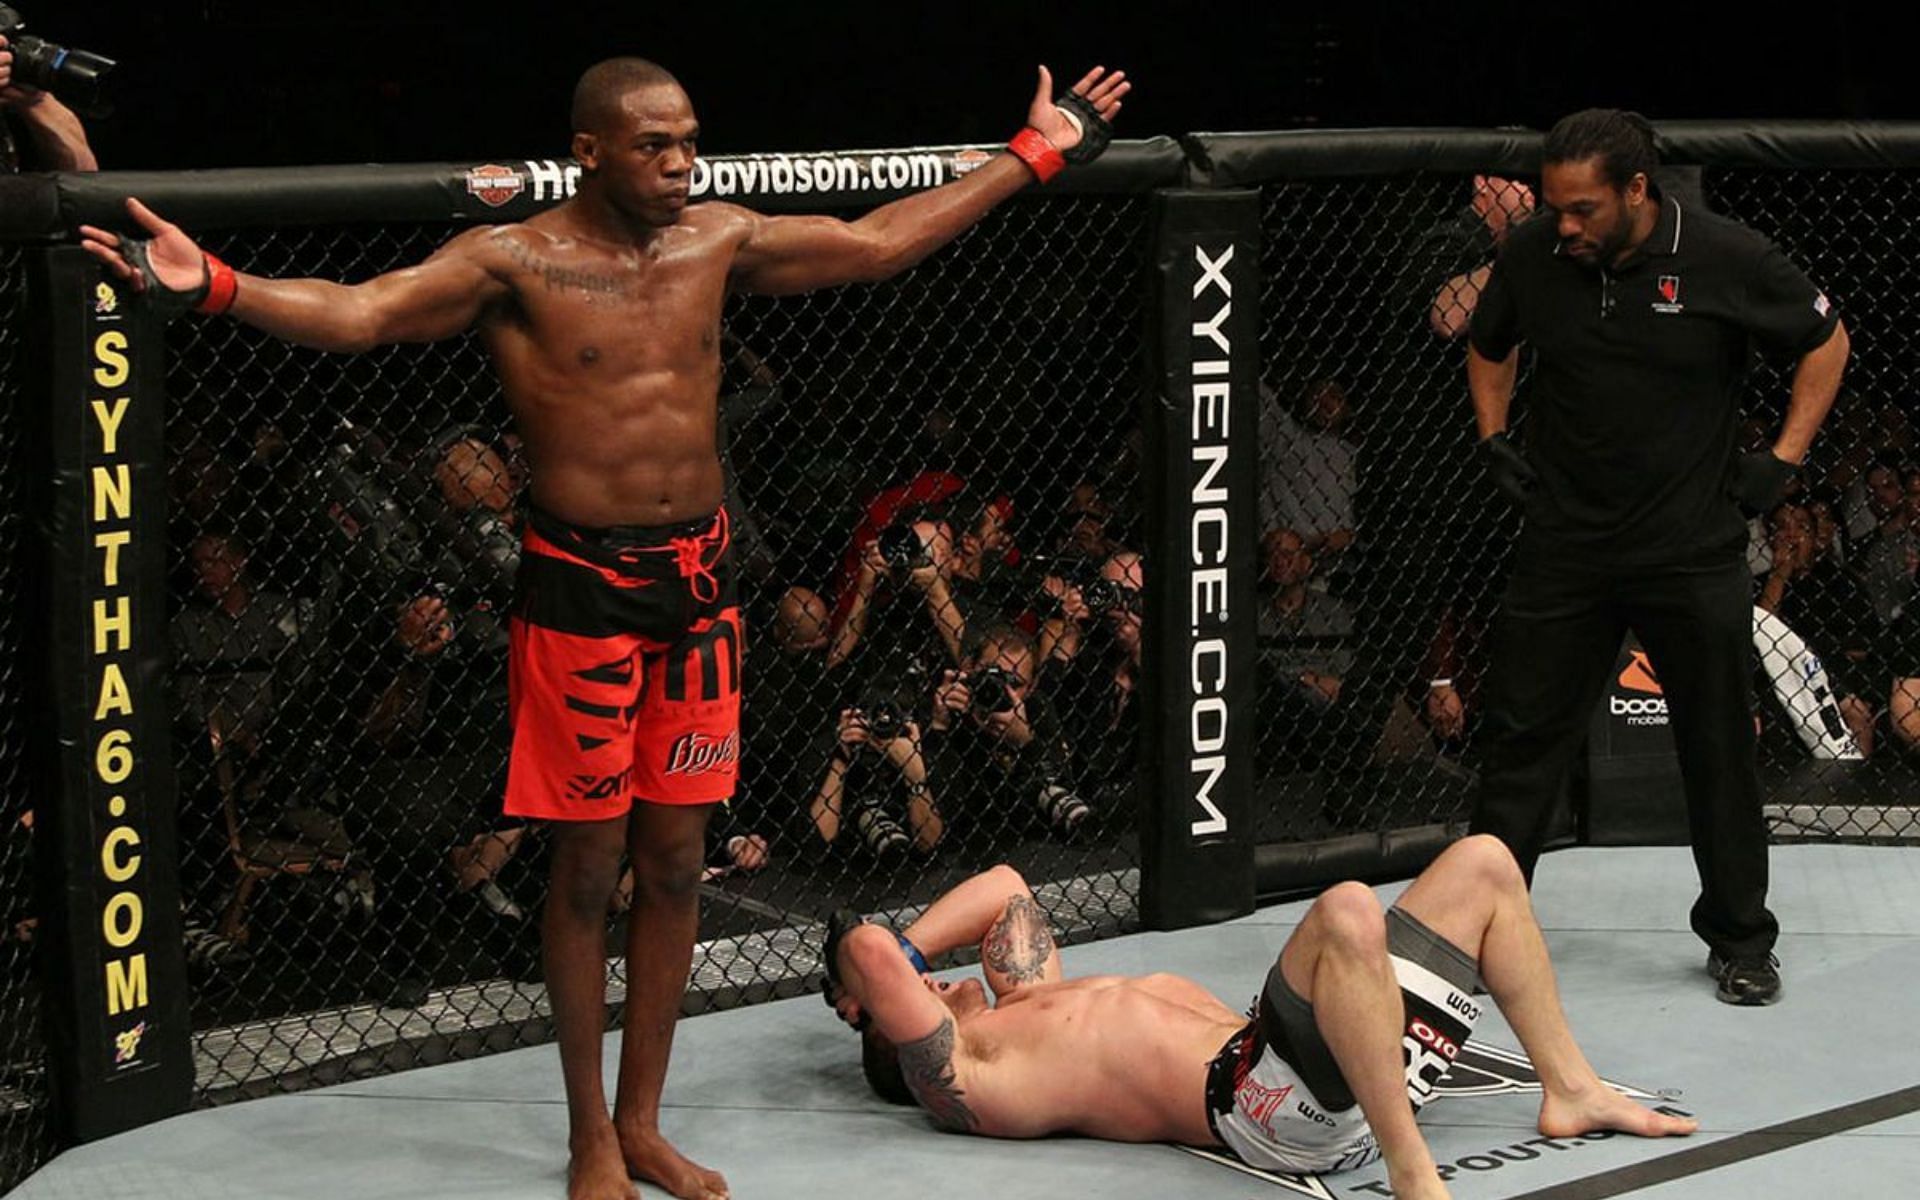 Jon Jones proved beyond doubt that he deserved all the hype around him